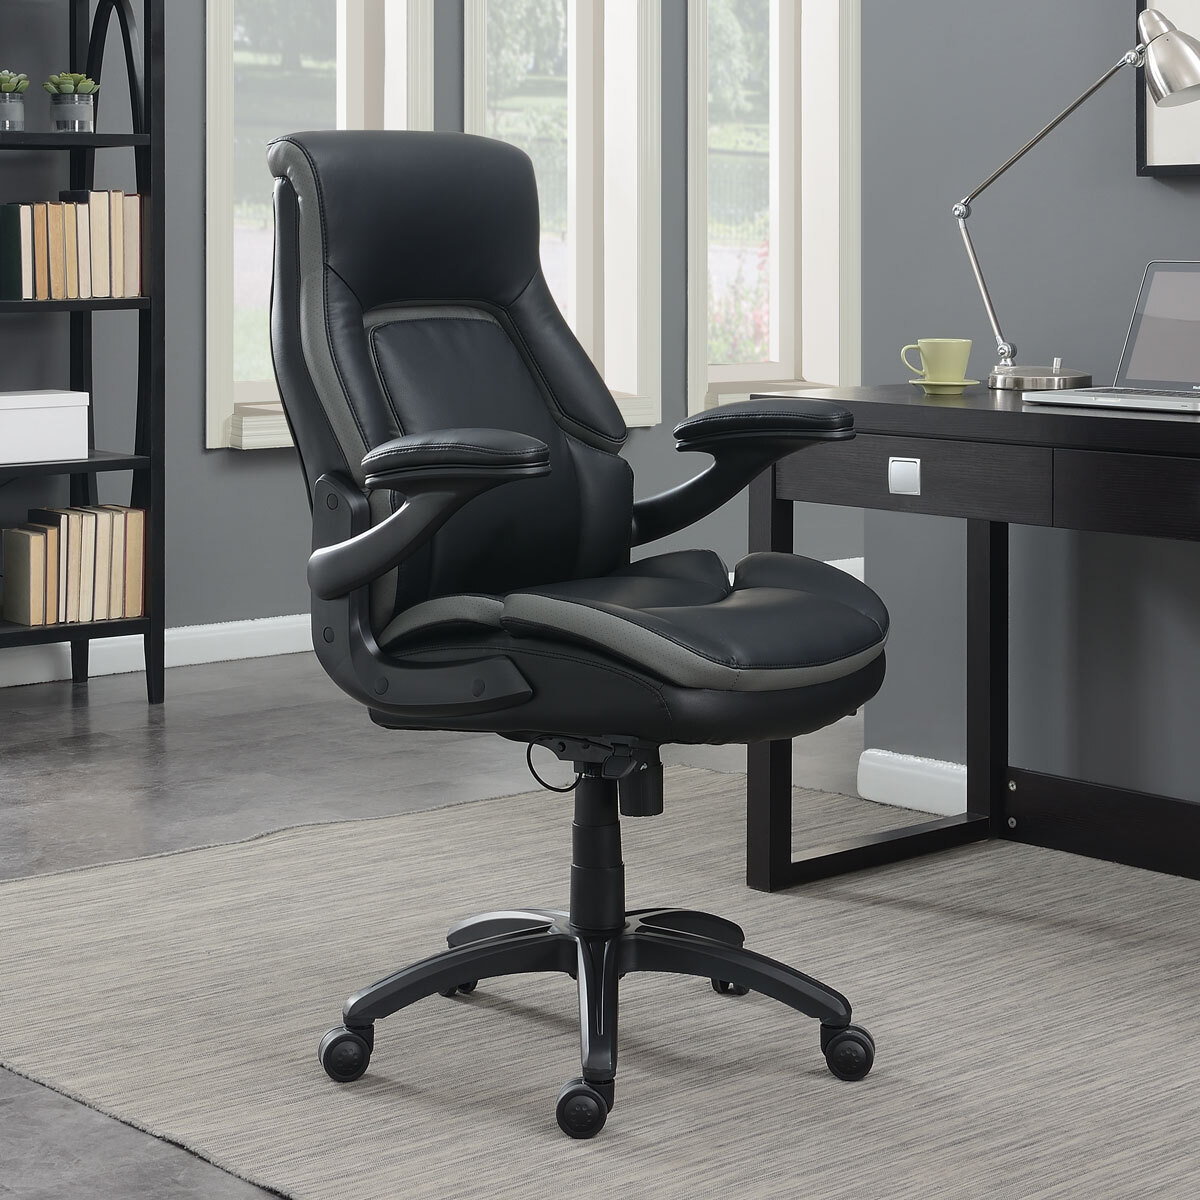 Costco Office Chair Lazy Boy : La Z Boy Browning Leather Executive